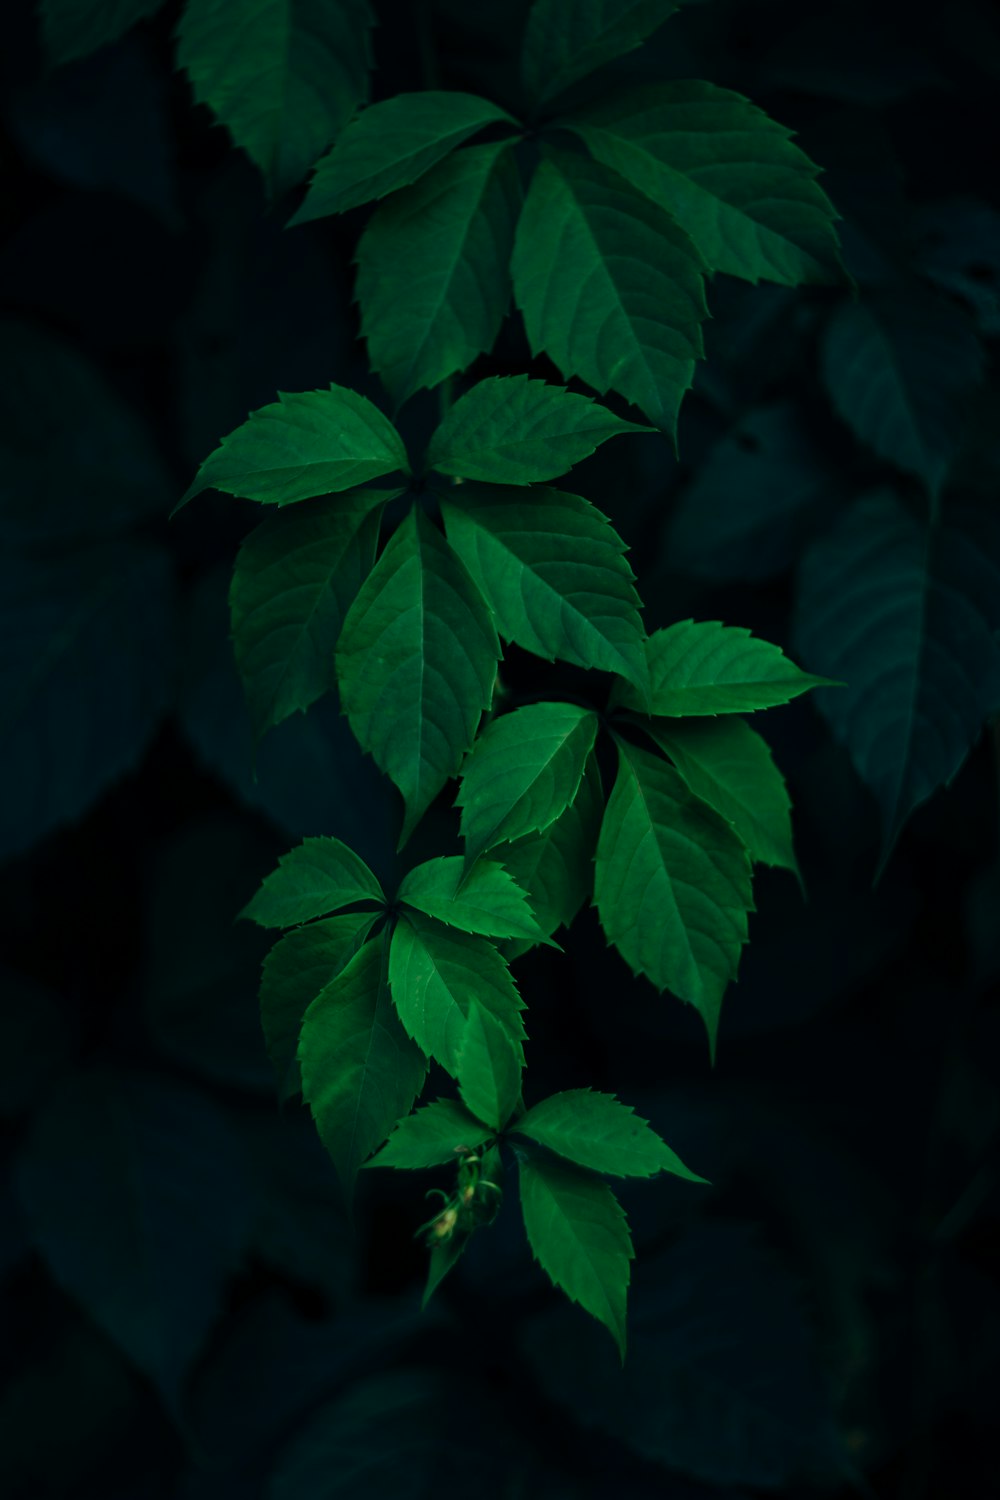 closeup photo of green leafed plant